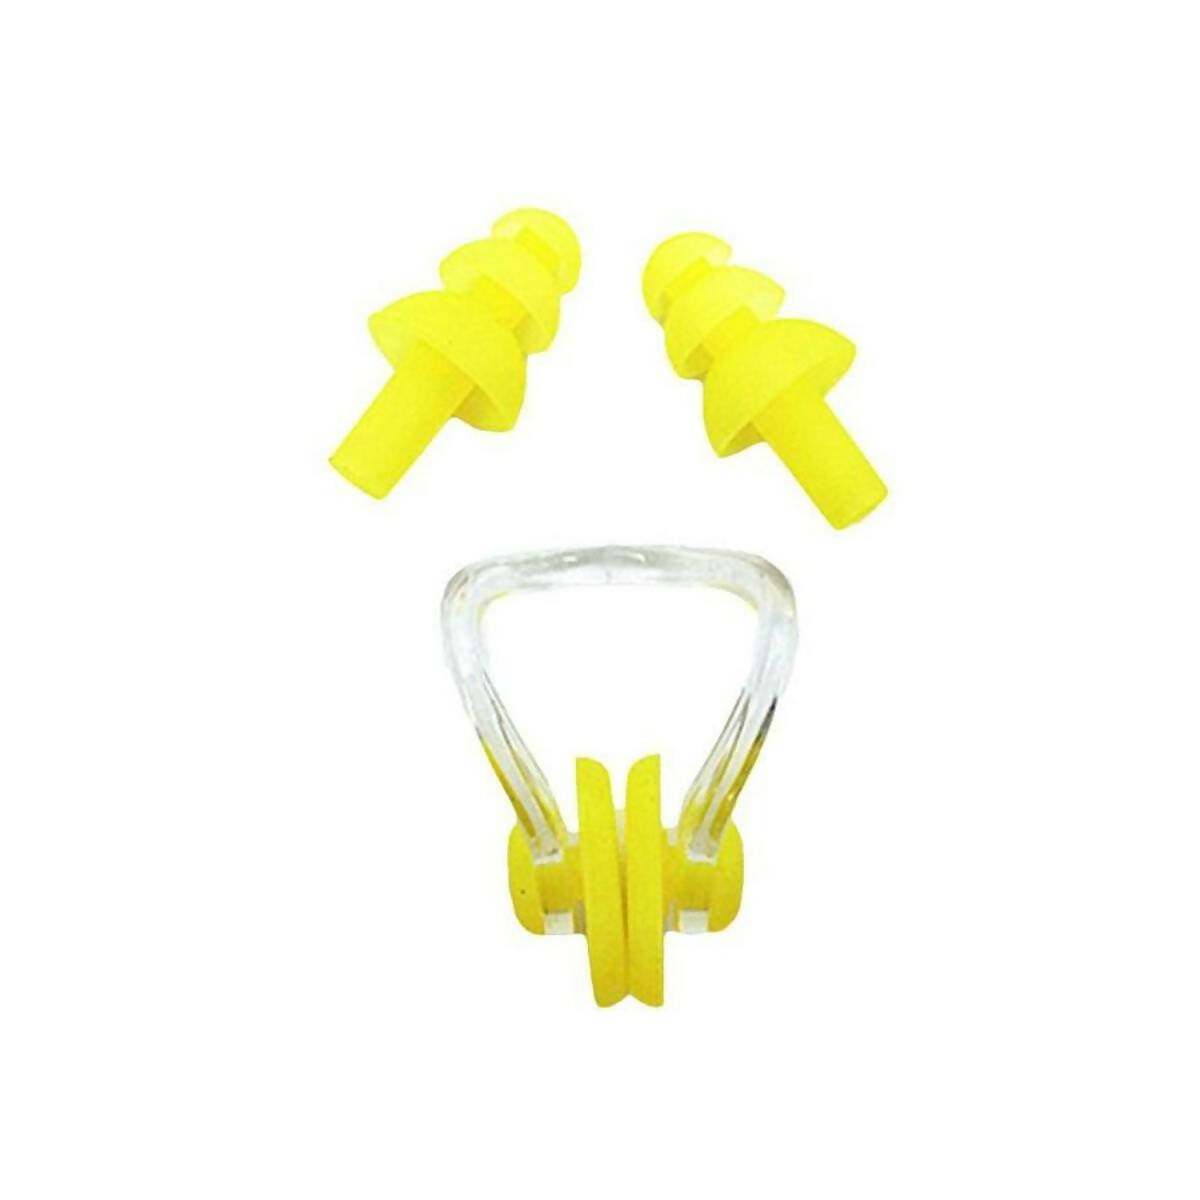 Soft Silicone Swimming Set Waterproof Nose Clip Ear Plug Set with Protective Case - Yellow